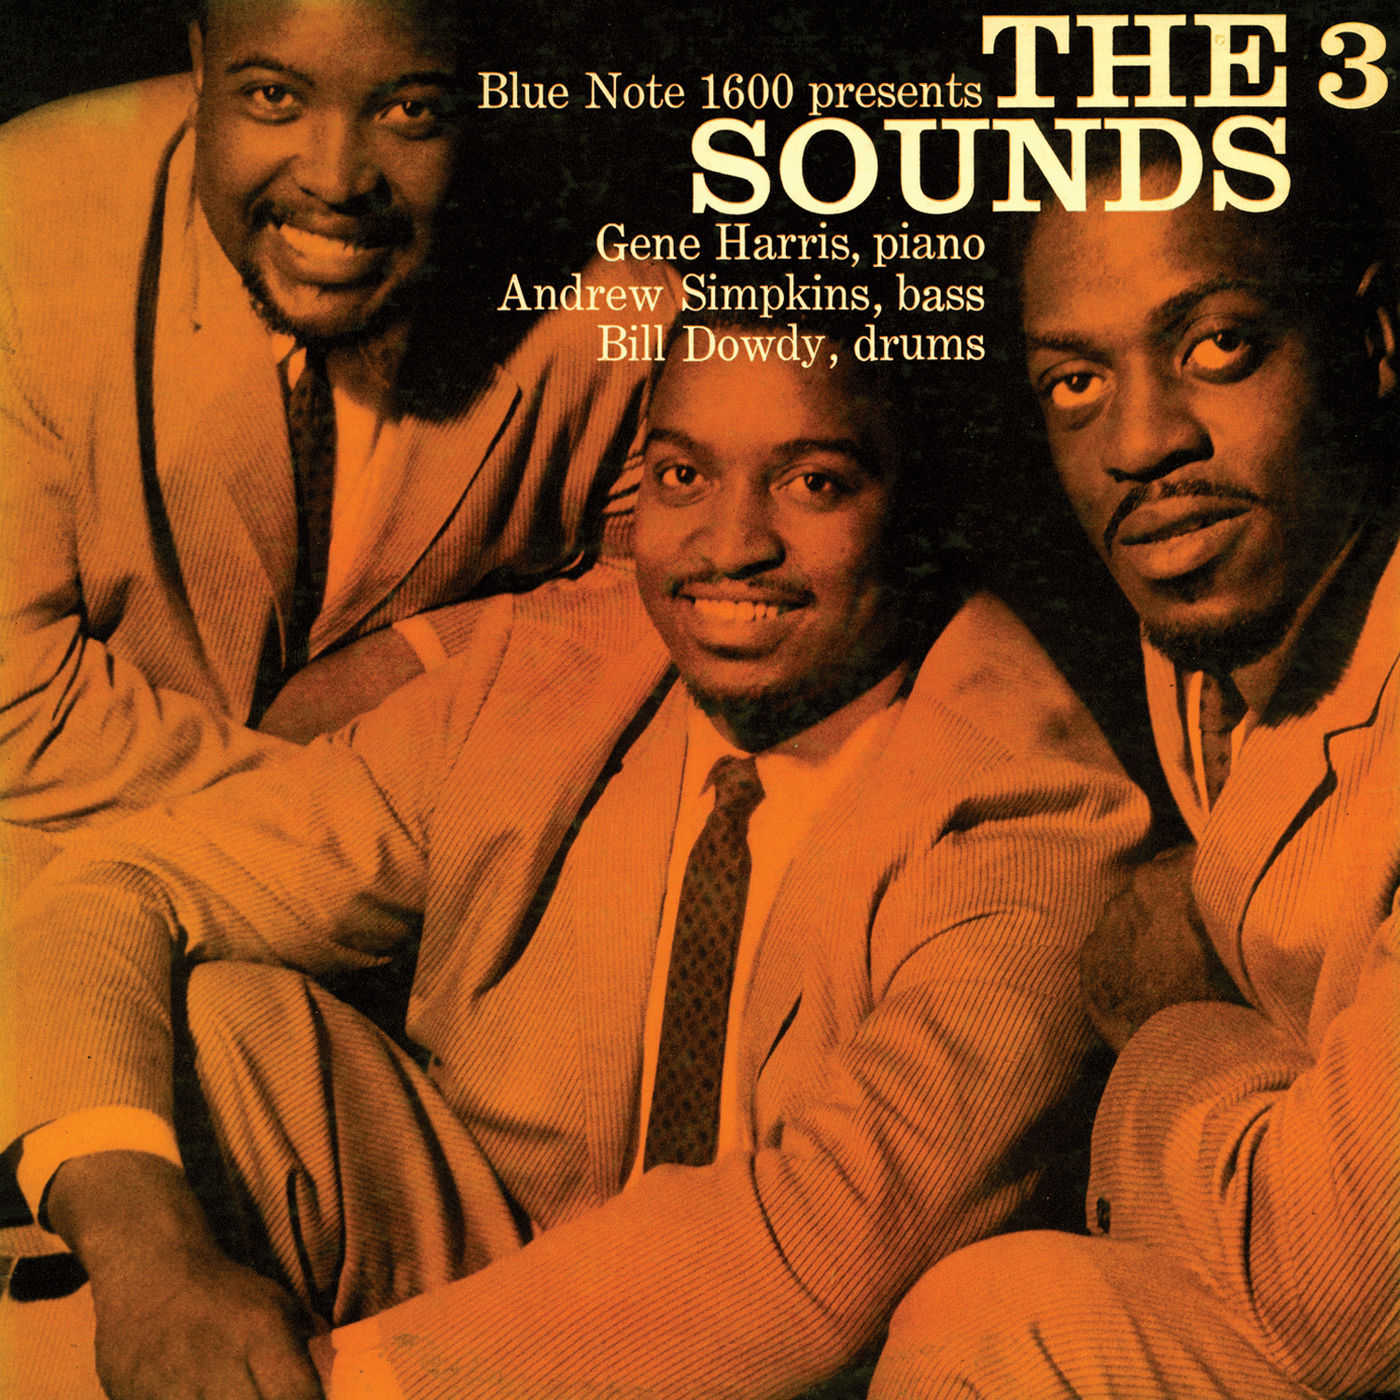 The Three Sounds – Introducing The 3 Sounds